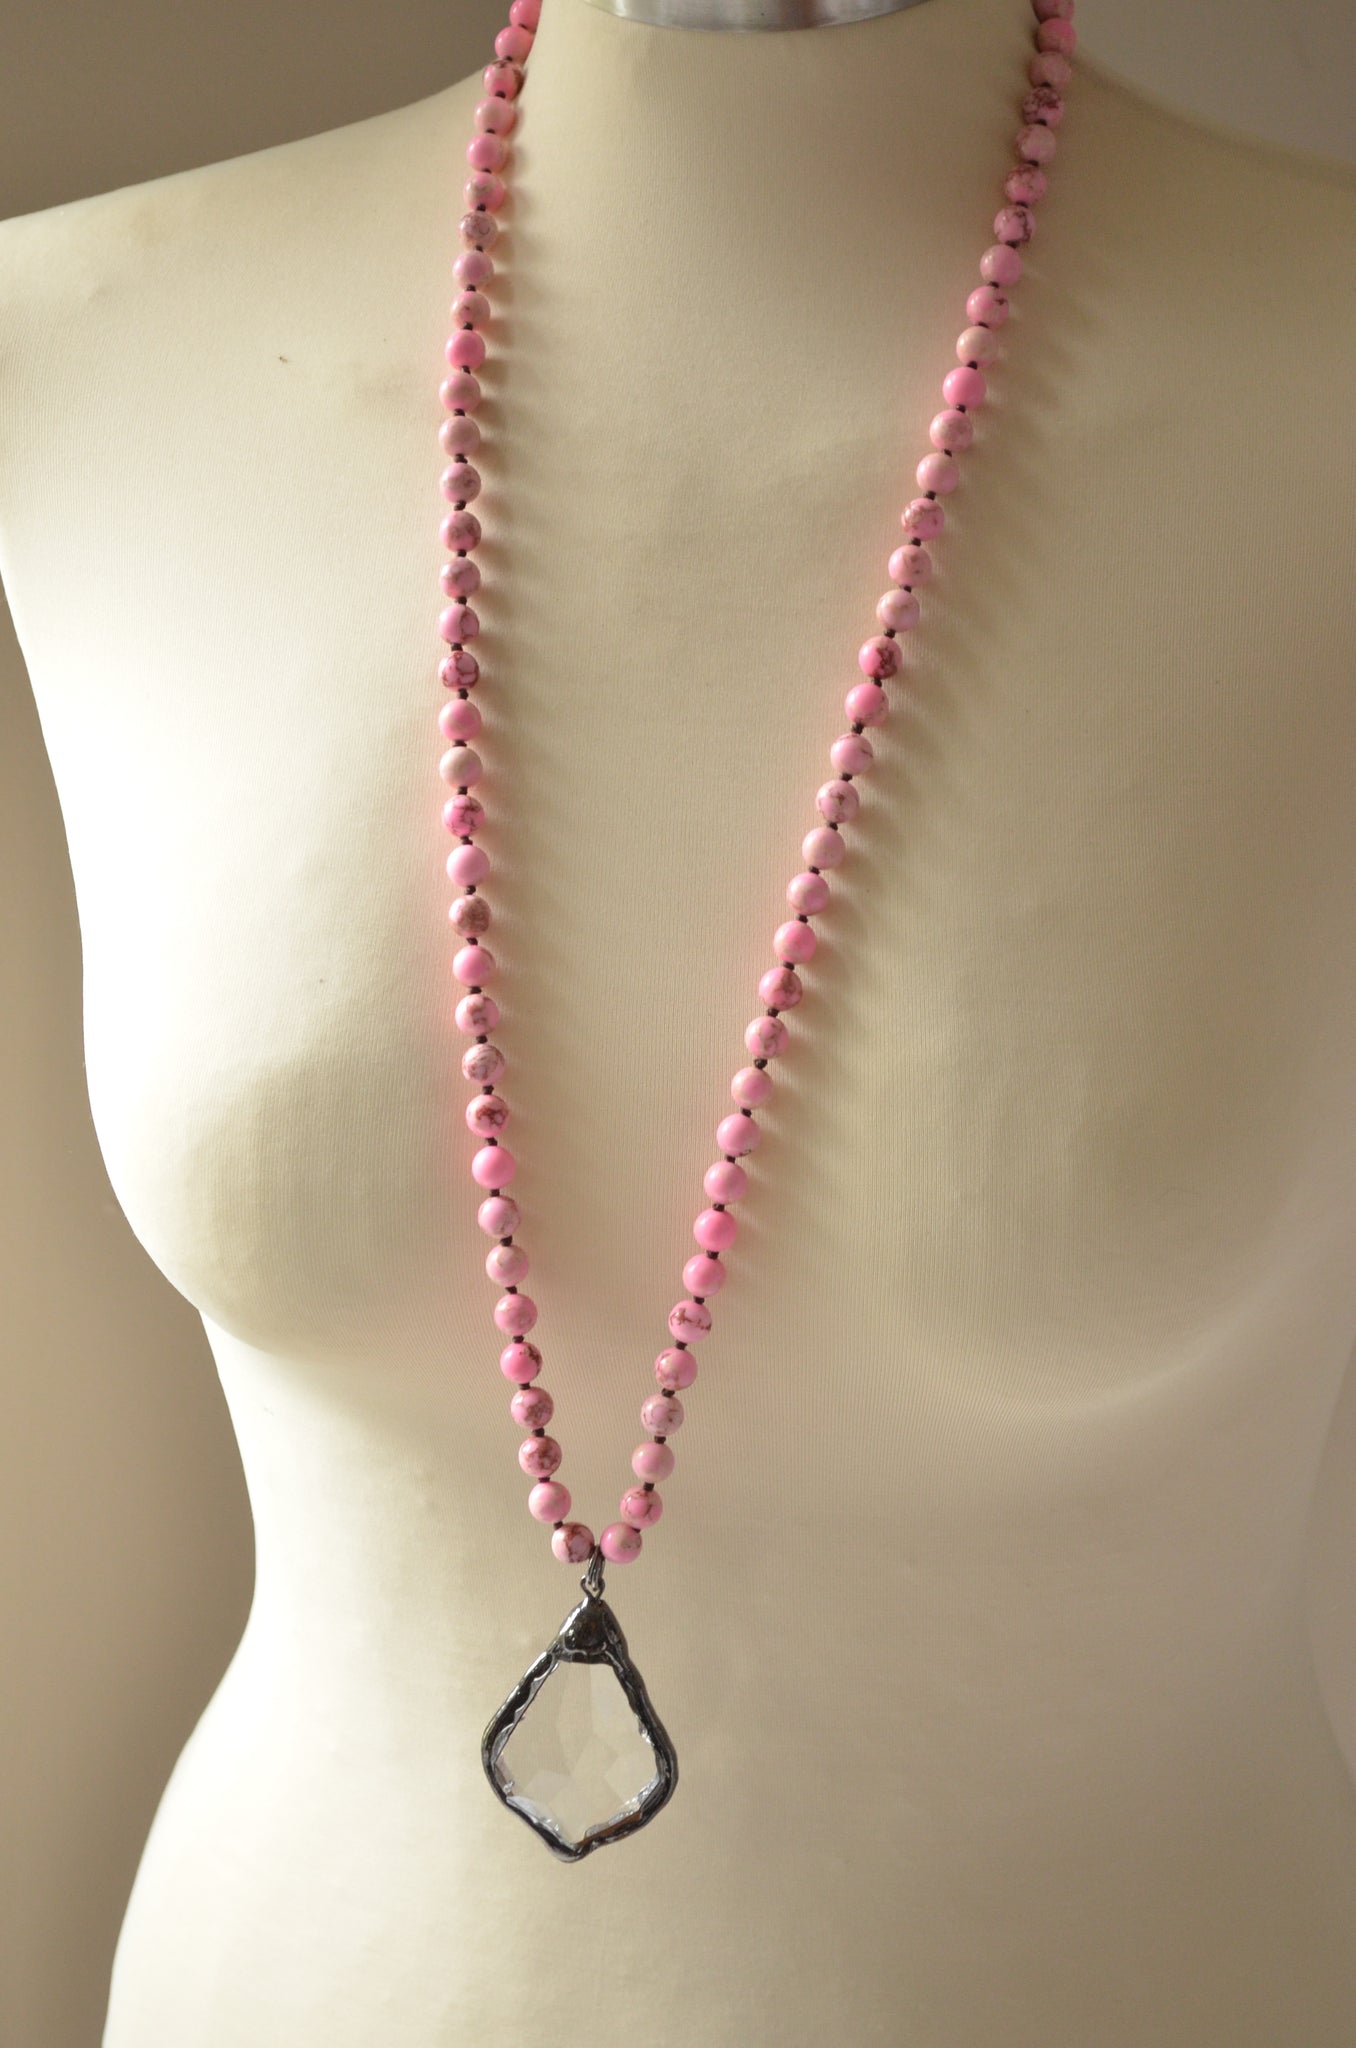 Cute 3 Strand Hot Pink Beaded Necklace | eBay